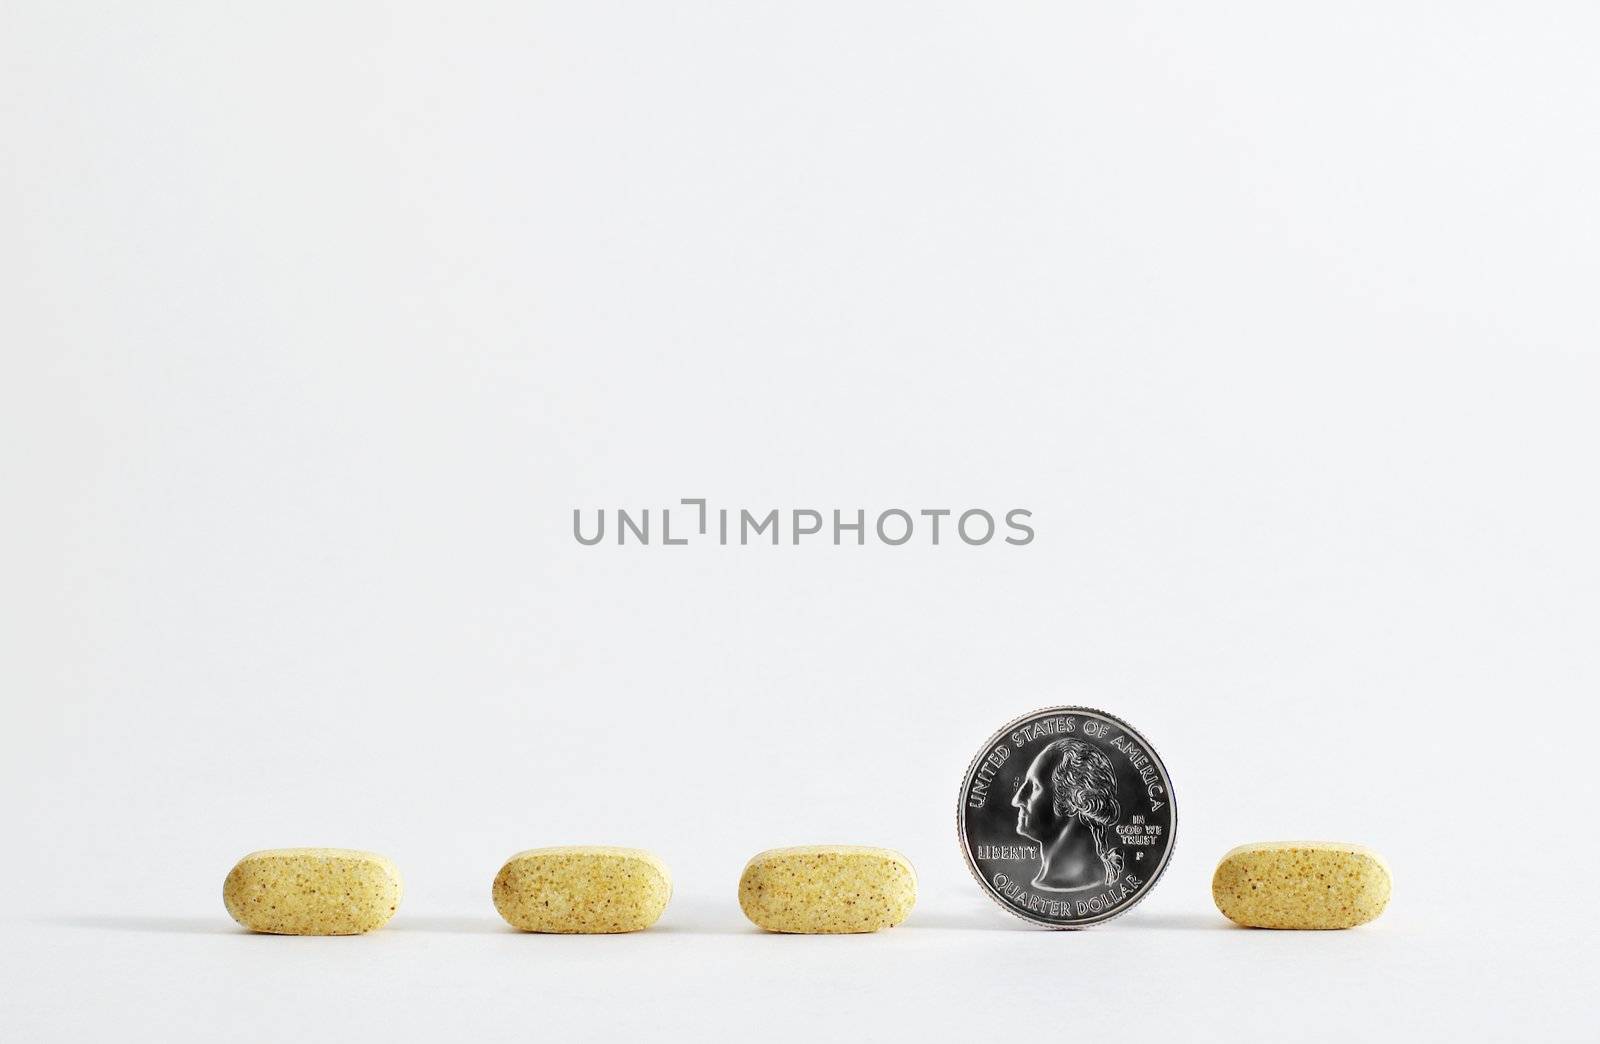 Line of pills, with quarter, against white background.